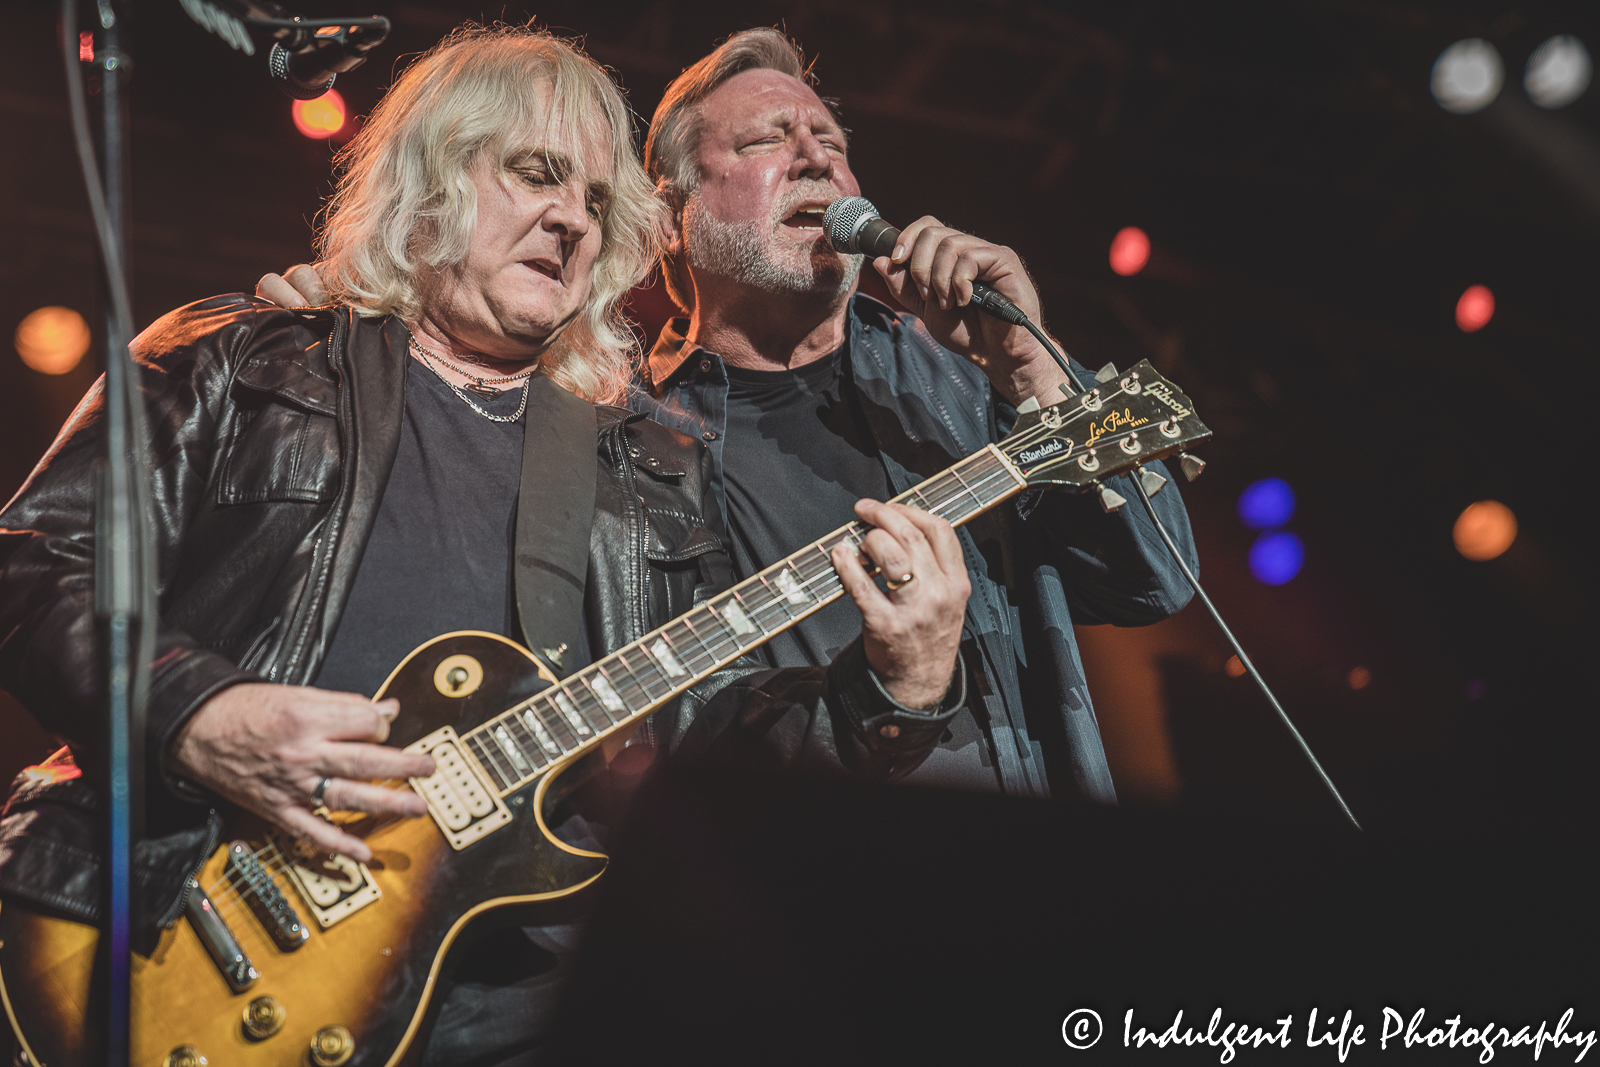 Missouri guitarist Rusty Crewse and lead singer Stephen Campbell performing together at Star Pavilion inside of Ameristar Casino in Kansas City, MO on April 9, 2022.